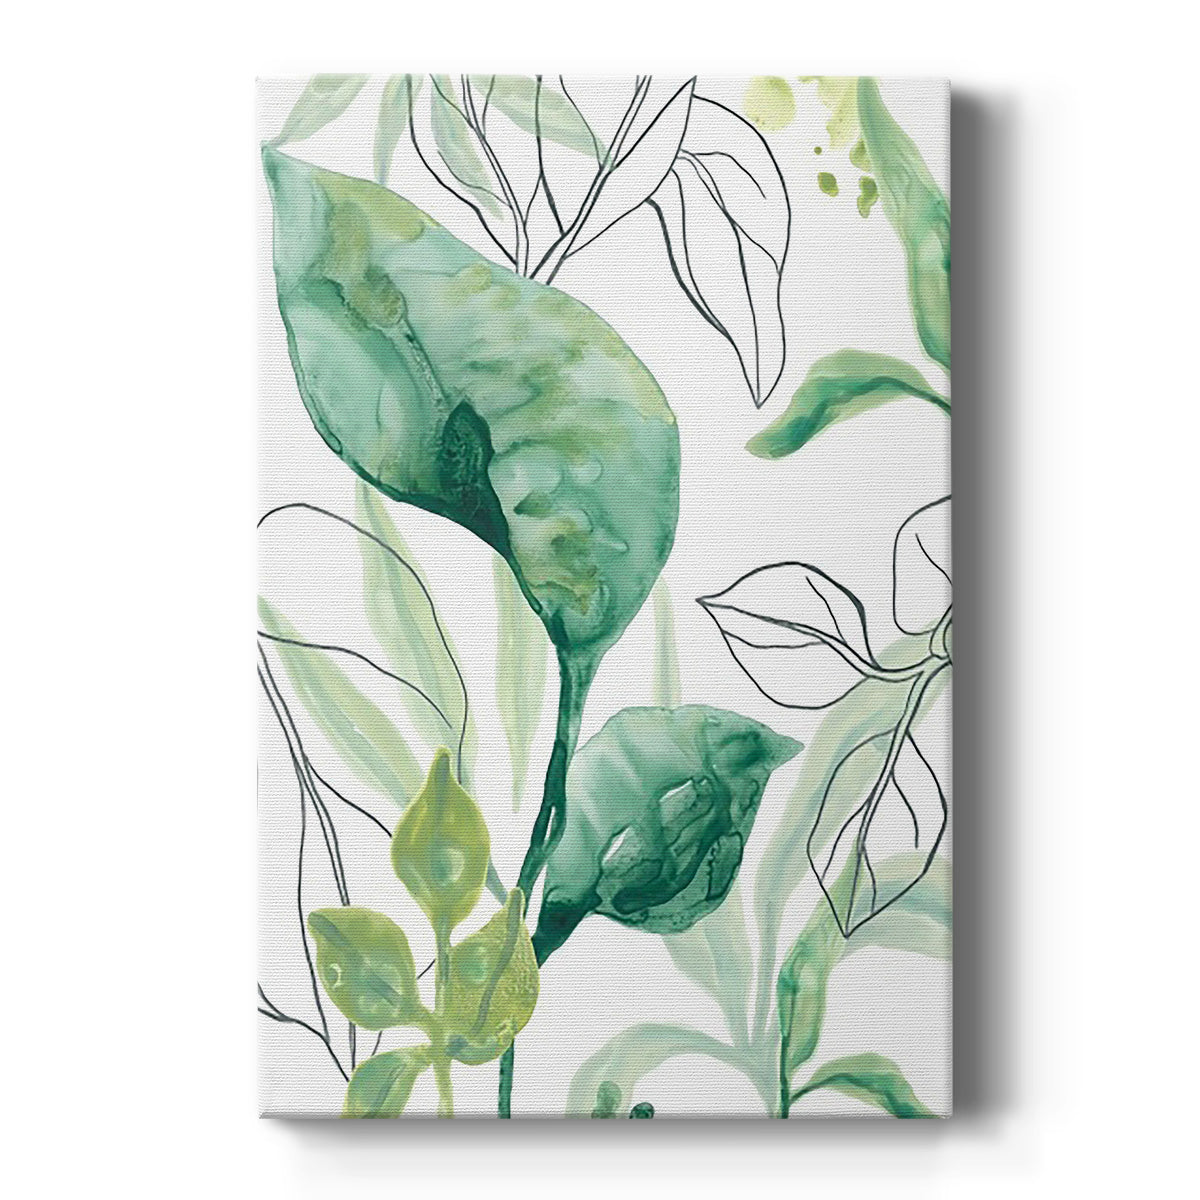 Tropical Palm Chorus I Premium Gallery Wrapped Canvas - Ready to Hang